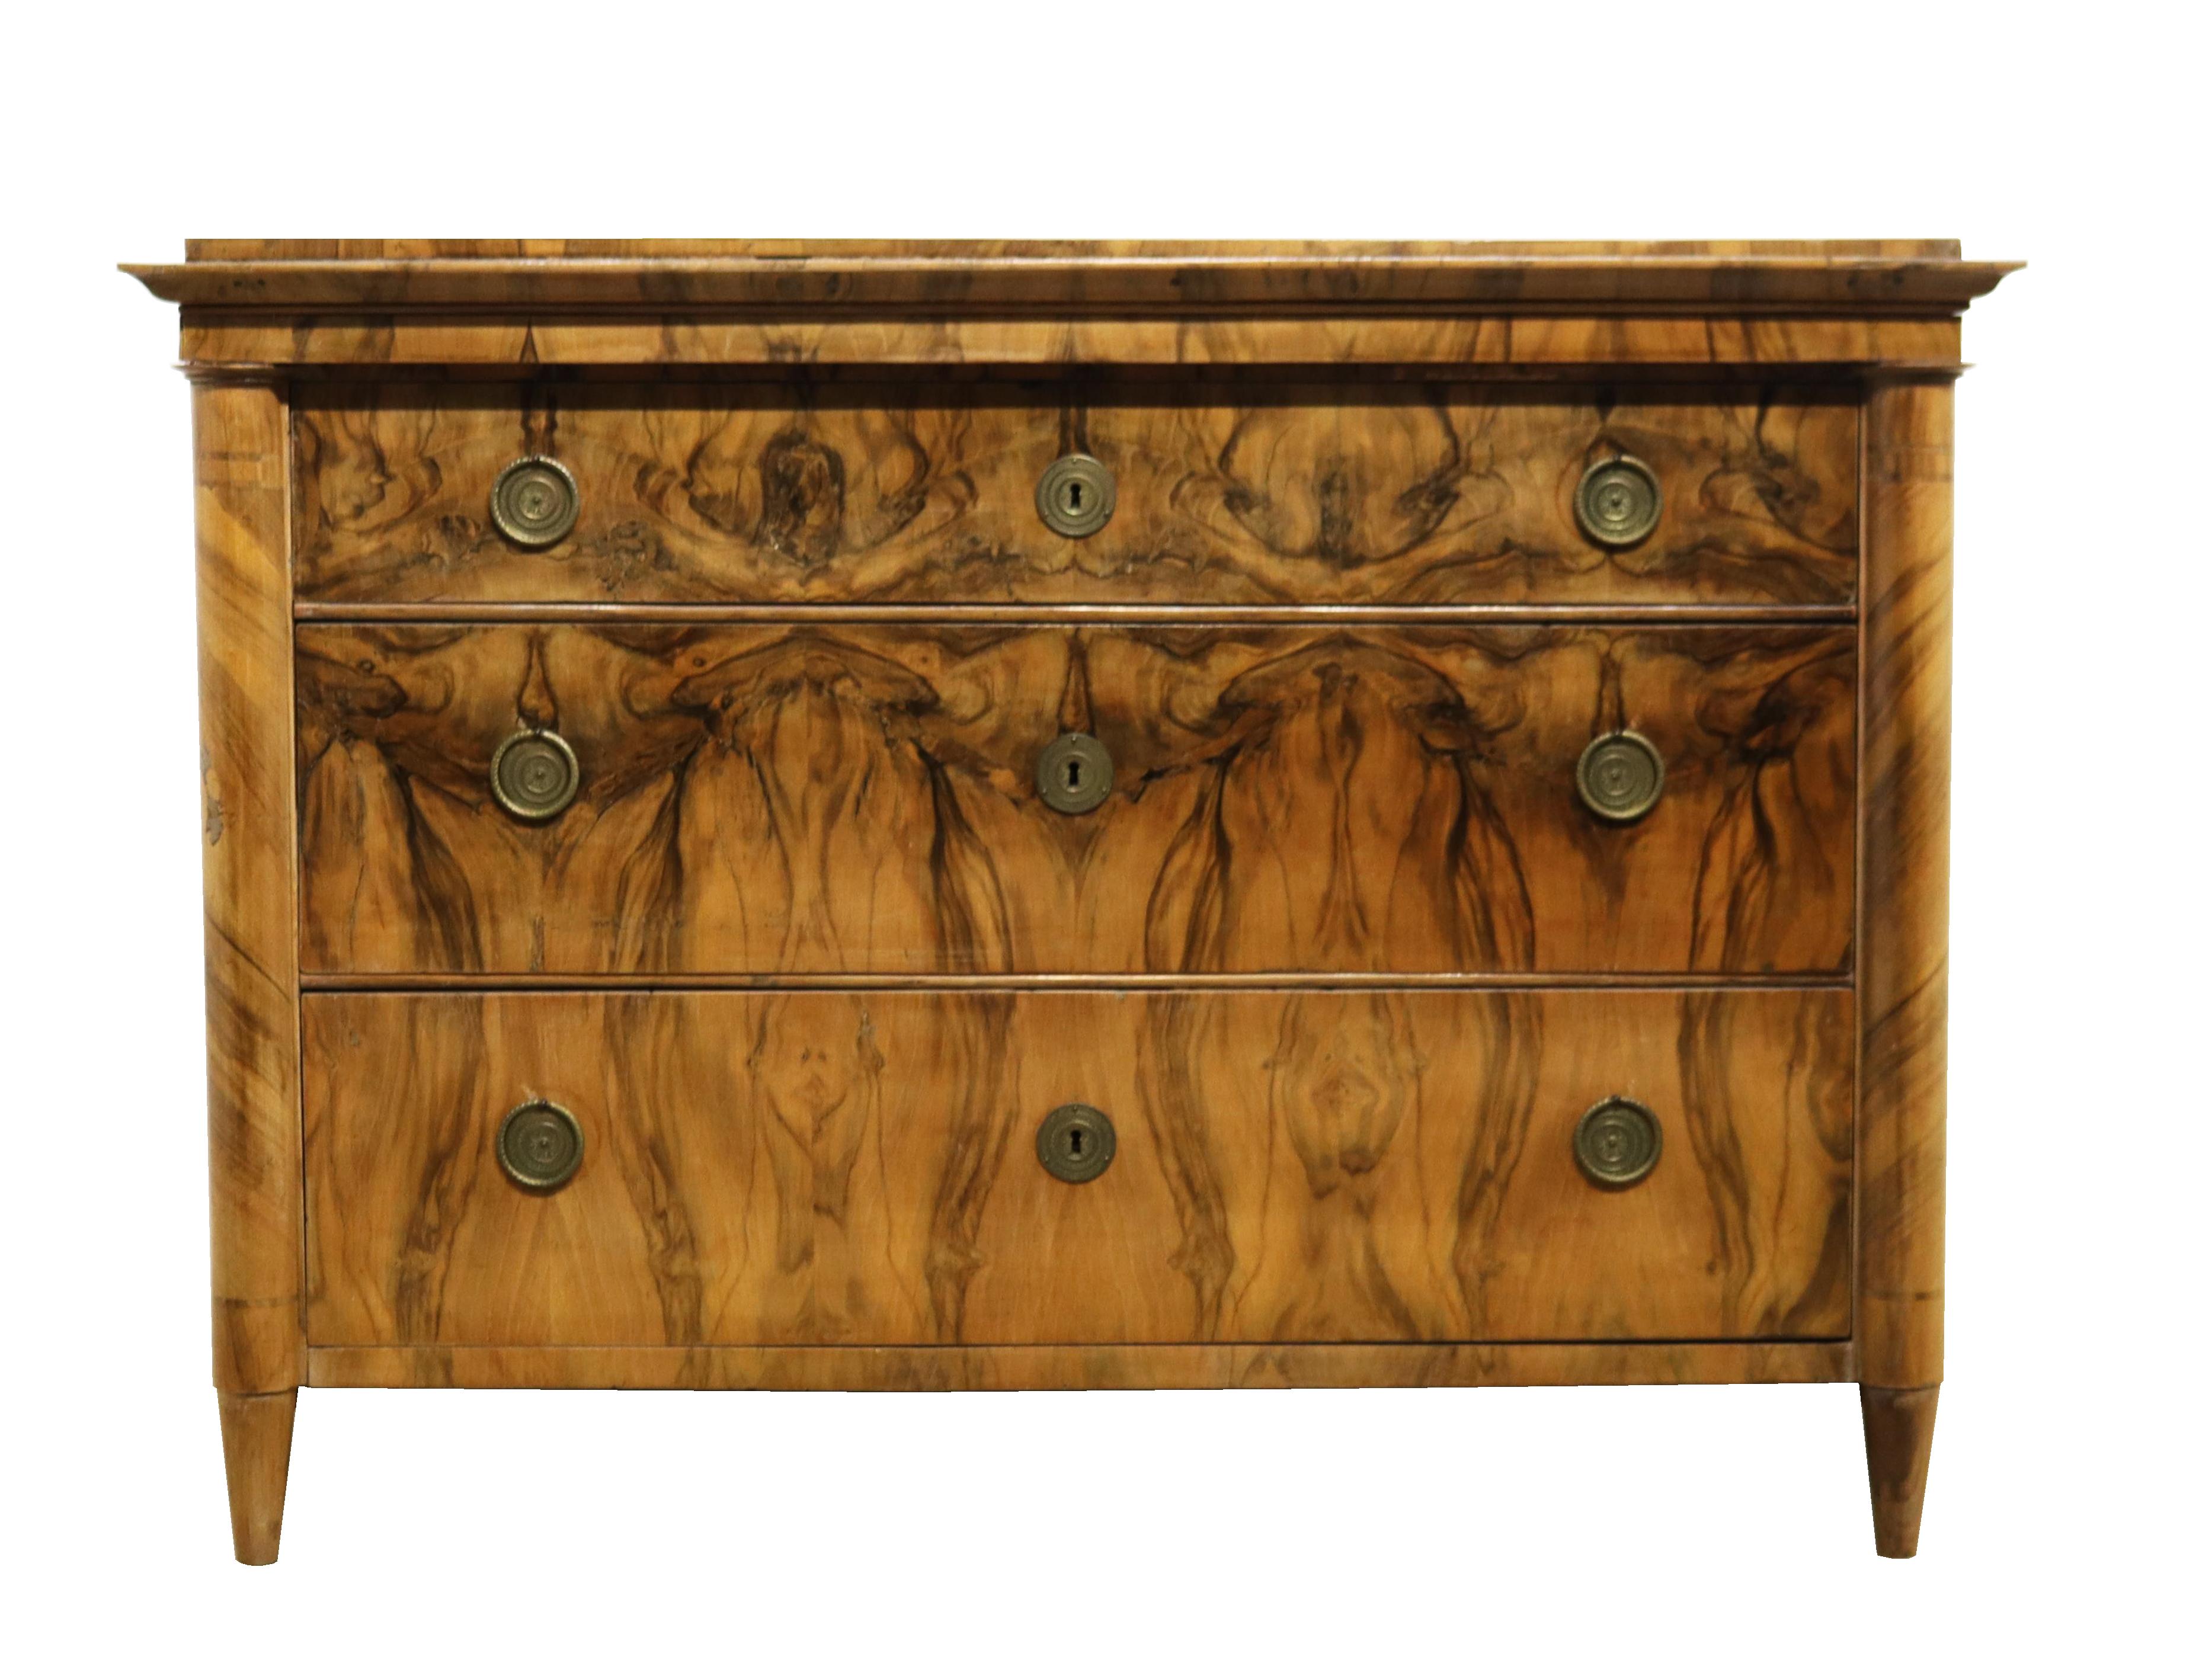 We would like to offer you this truly exquisite, early Biedermeier walnut commode. The piece was made in Vienna circa 1825.

Viennese Biedermeier is distinguished by their sophisticated proportions, rare and refined design and excellent